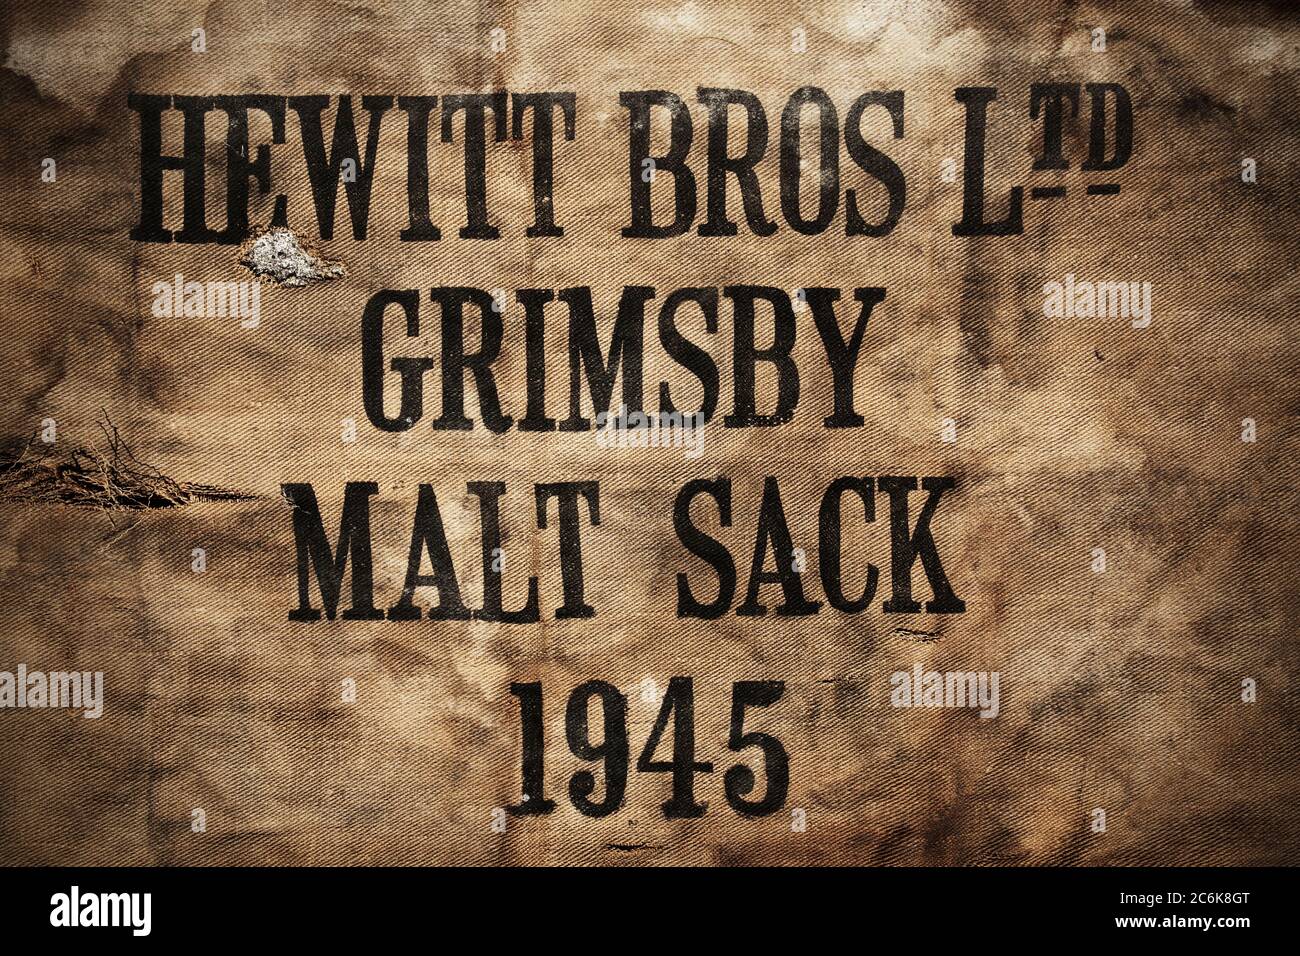 Old hessian sack used by Hewitt Brothers brewery of Grimsby, UK. Stock Photo